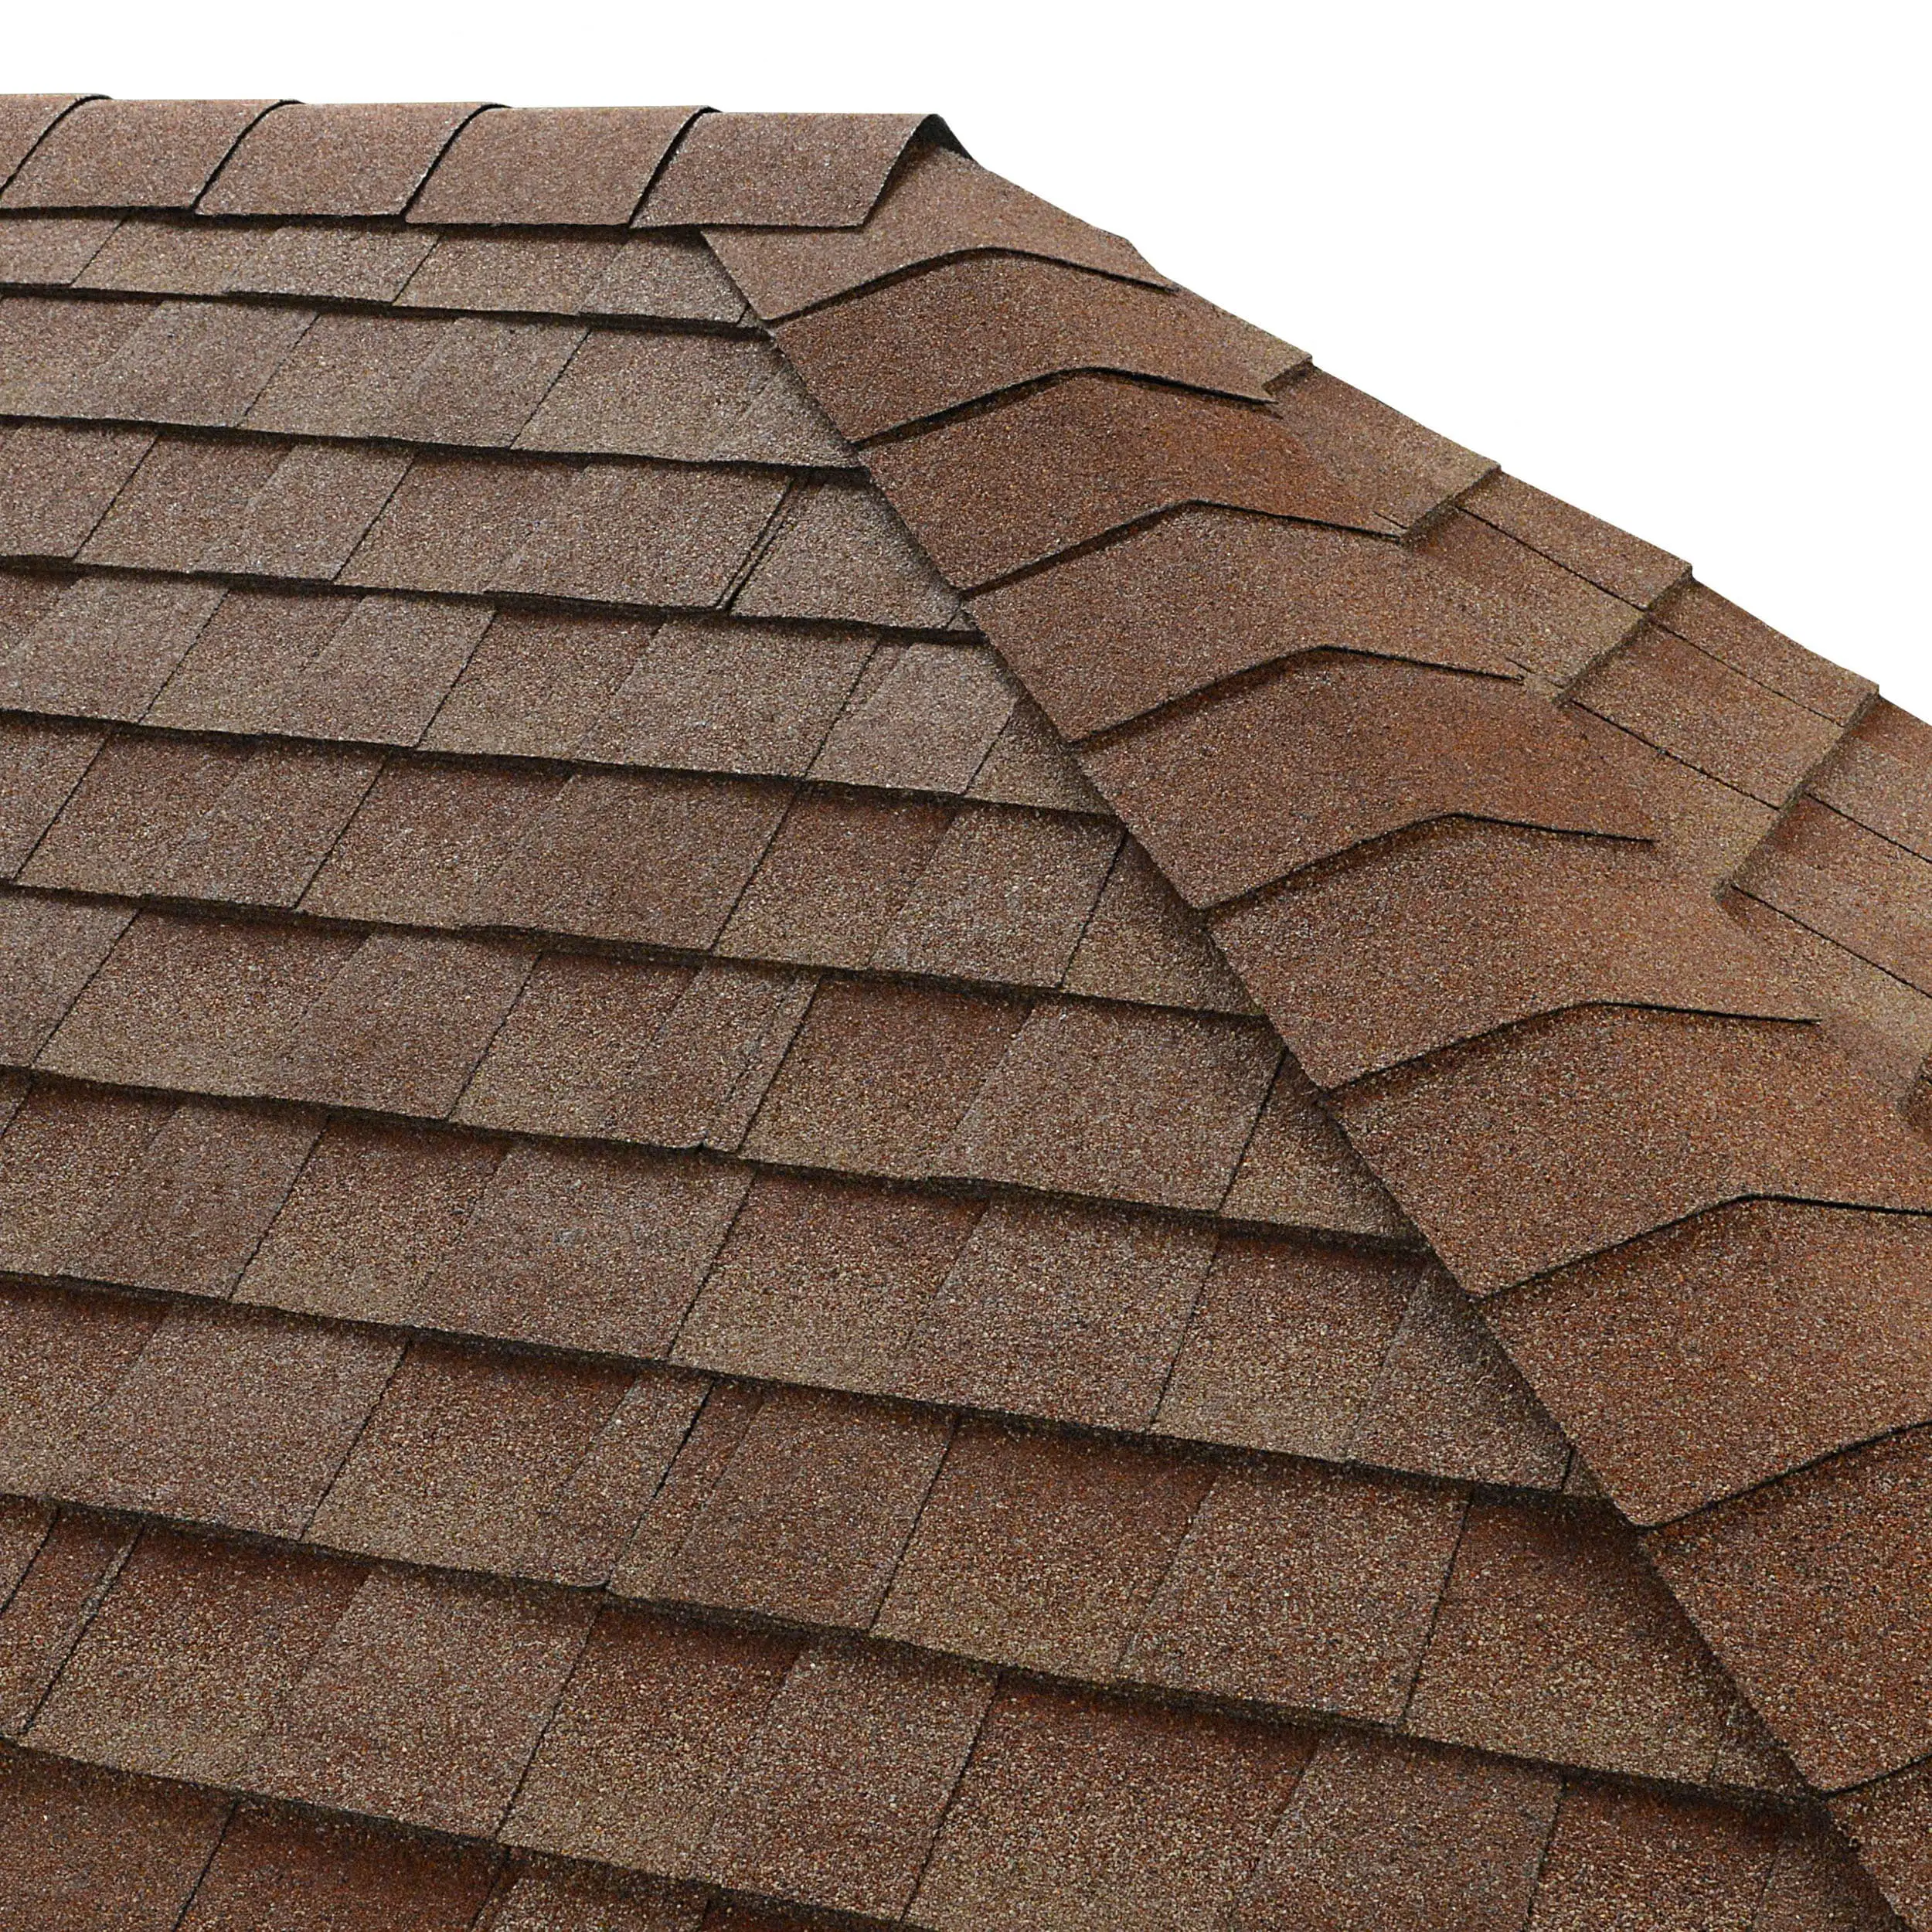 Copper Roof Shingles at Lowes.com